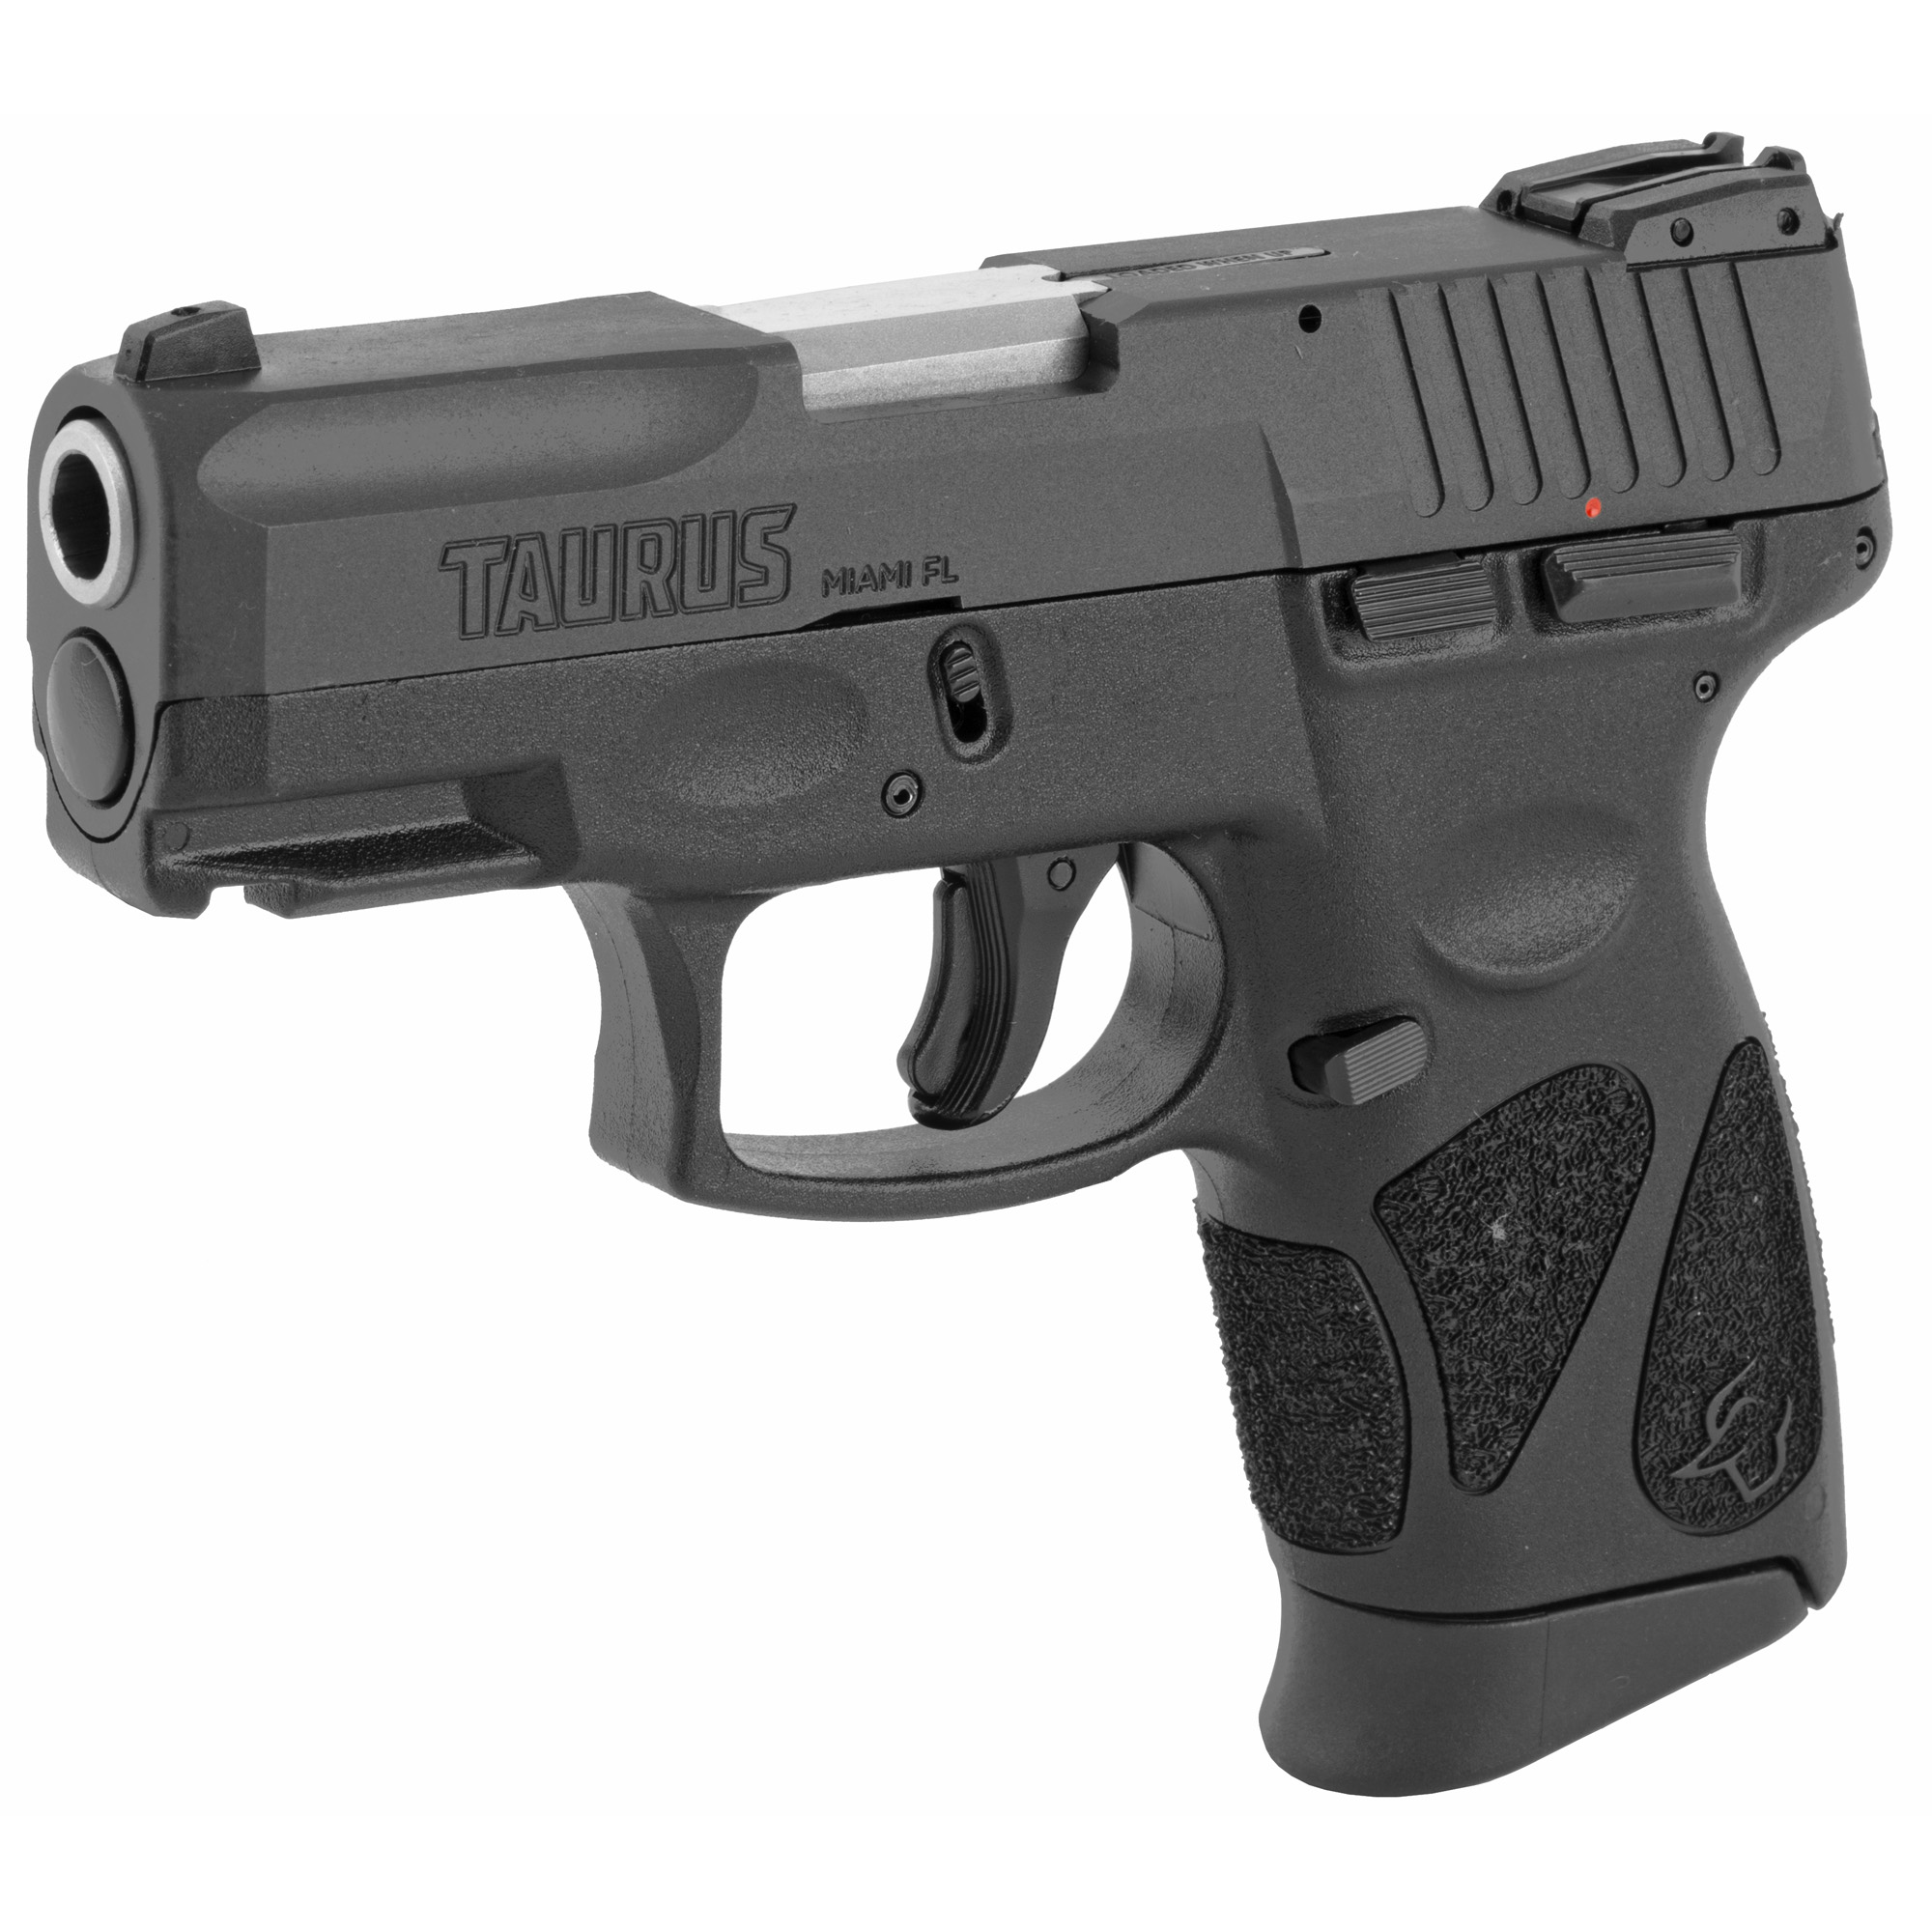 Taurus, G2C, Striker Fired, Semi-automatic, Polymer Frame Pistol, Compact , 9MM, 3.2" Barrel, Matte Finish, Black, Adjustable Sights, Manual Thumb Safety, 12 Rounds, 2 Magazines